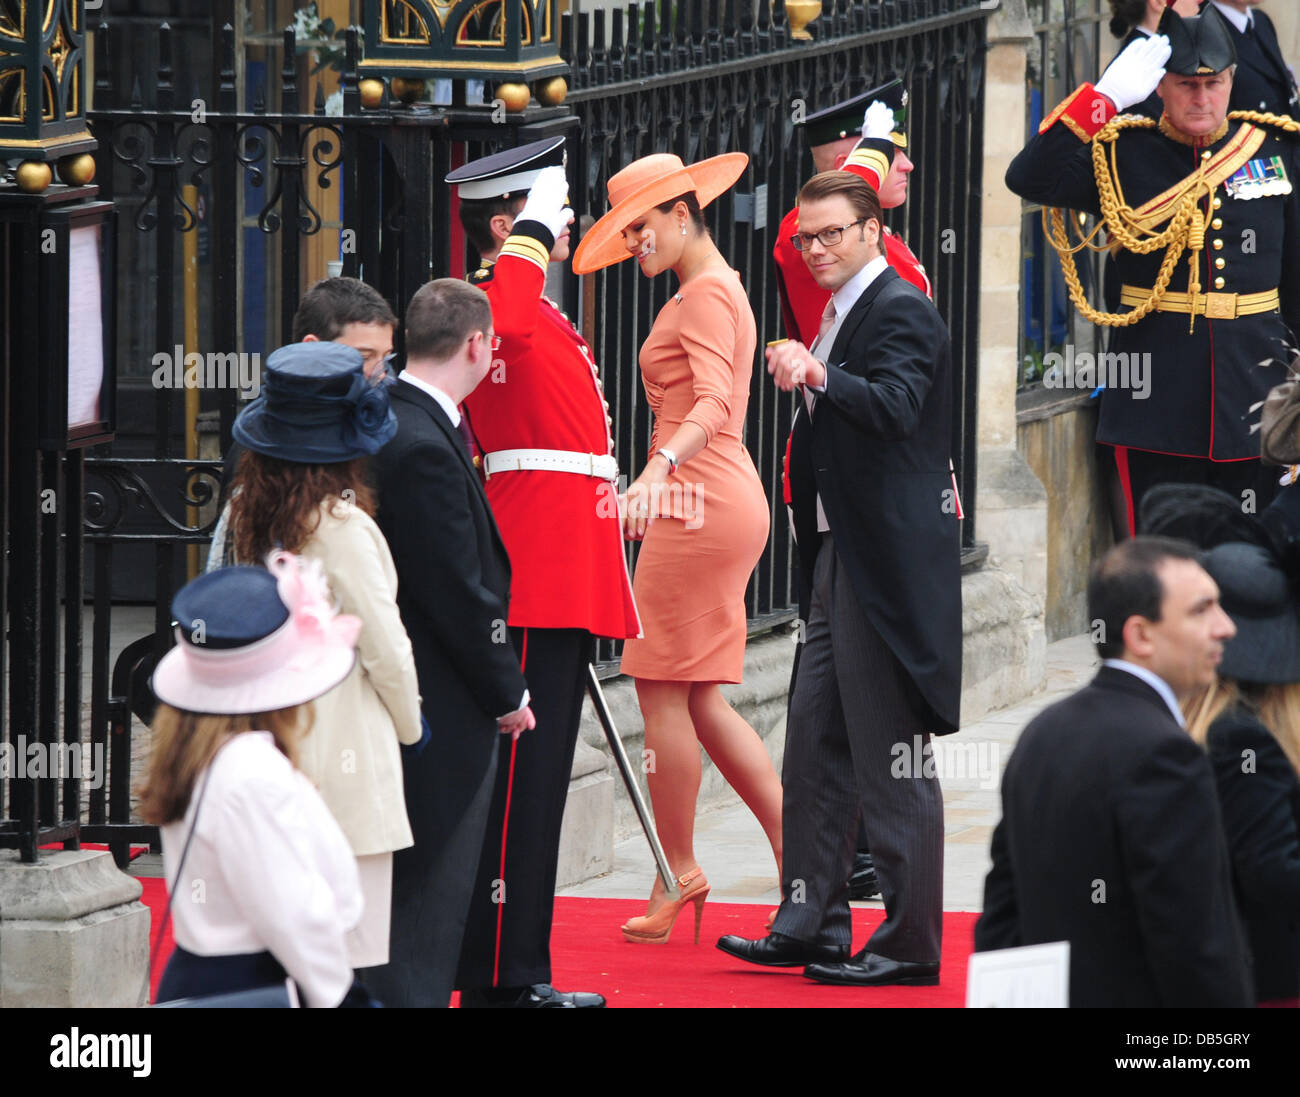 Daniel Westling and Princess VIctoria of Sweden   The Wedding of Prince William and Catherine Middleton - Westminster Abbey   London, England - 29.04.11 Stock Photo